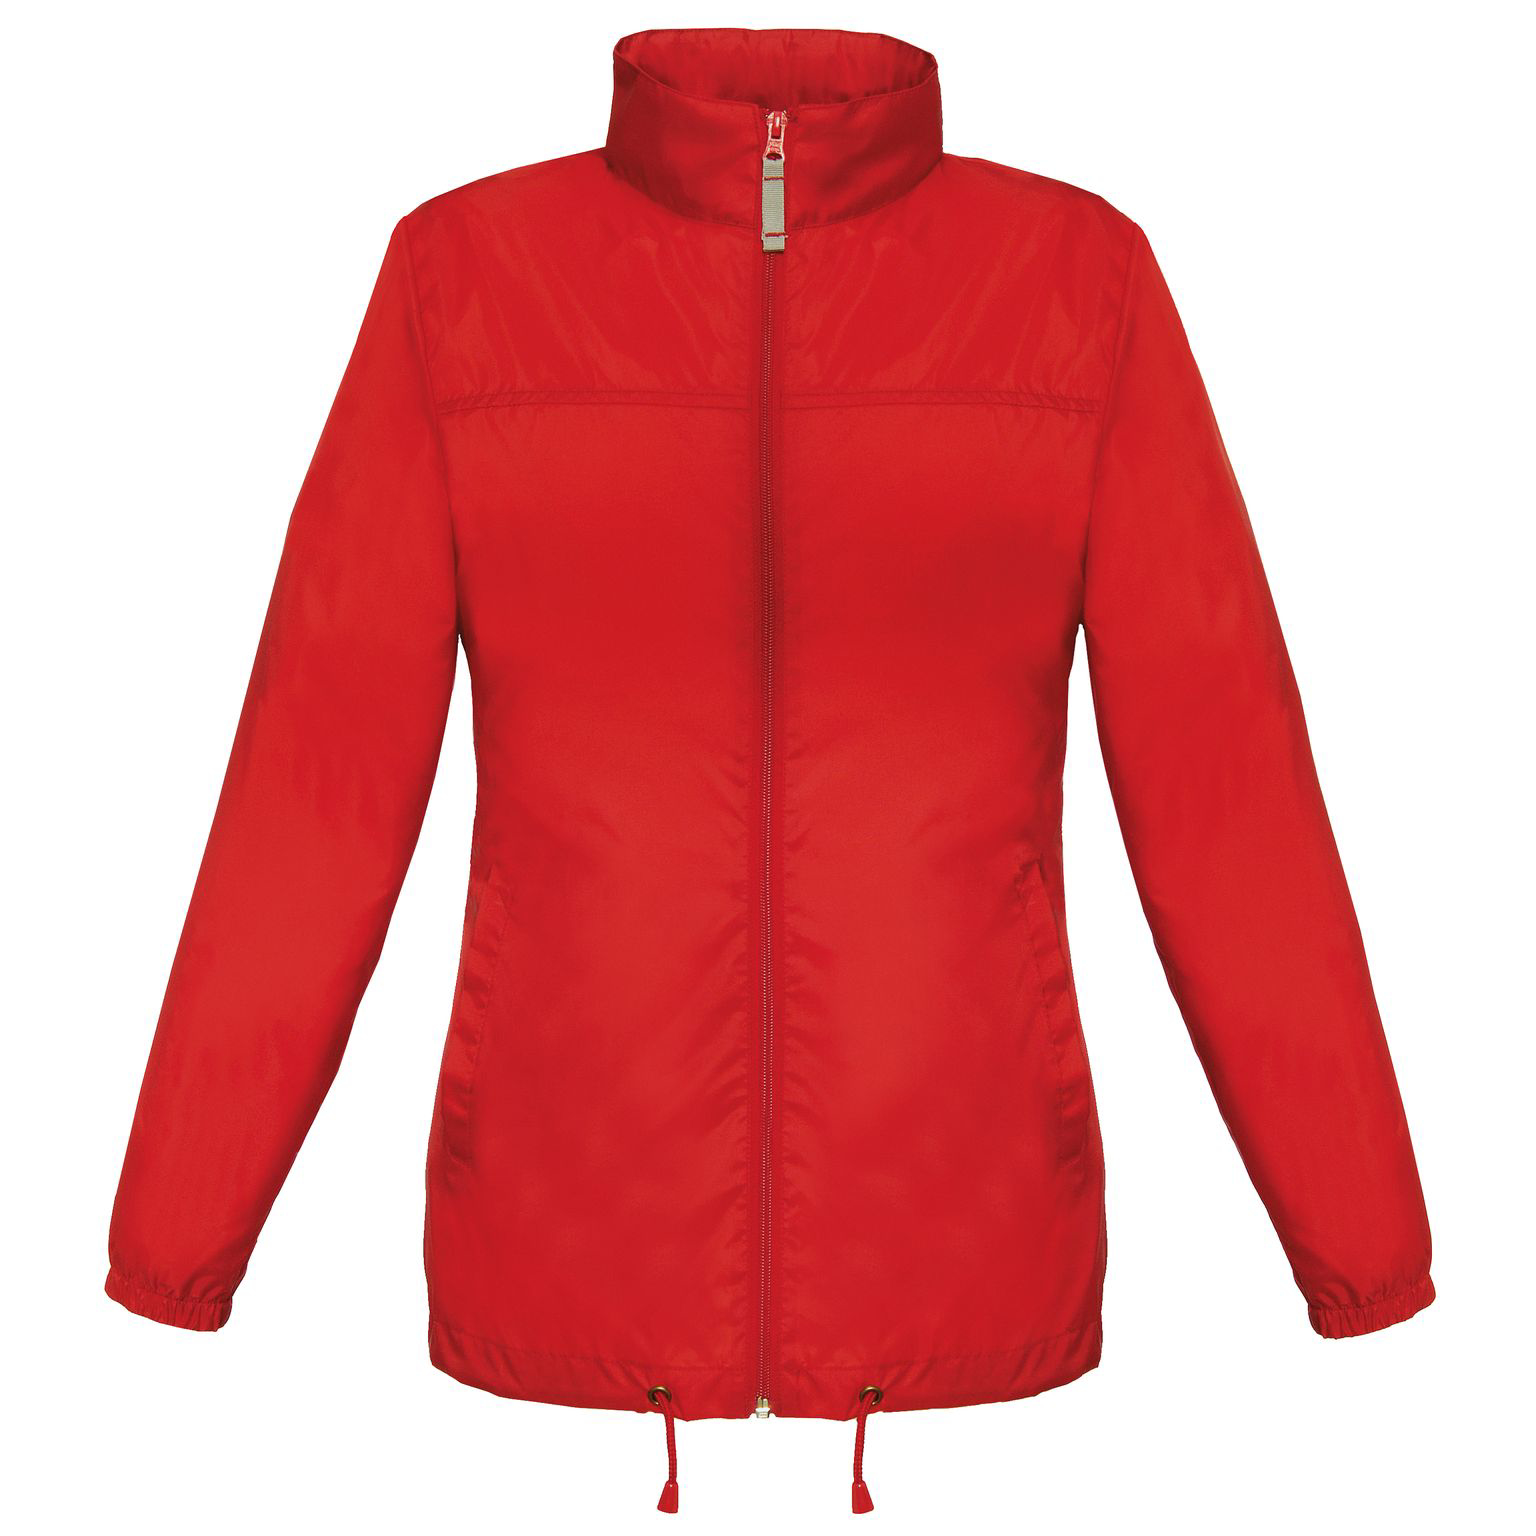 Women's Sirocco Jacket in red